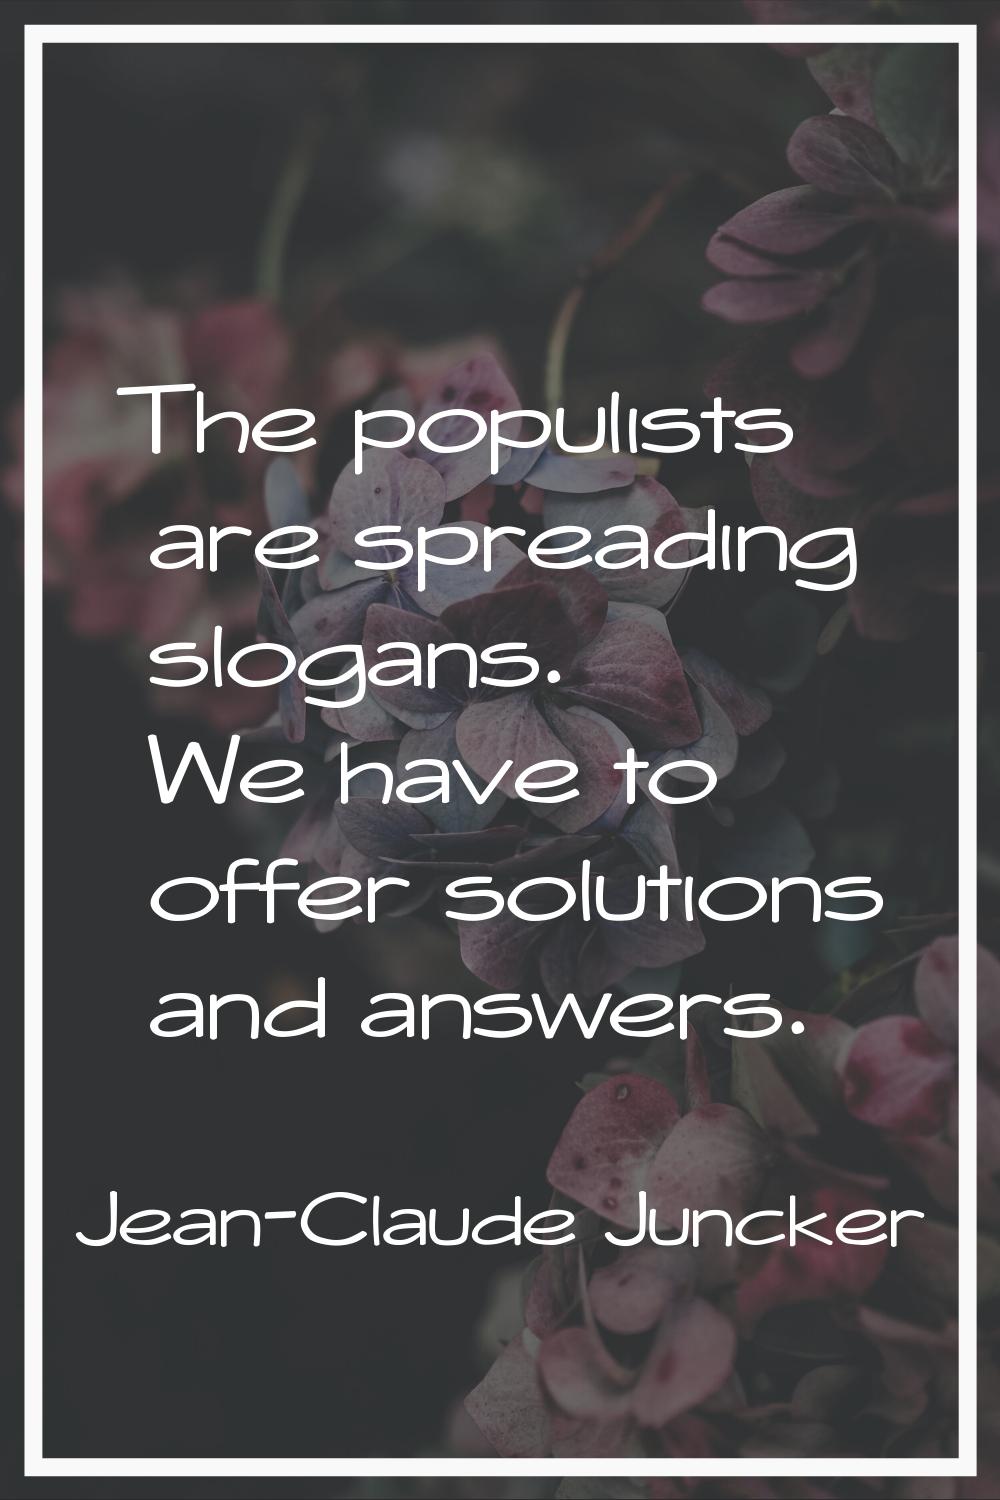 The populists are spreading slogans. We have to offer solutions and answers.